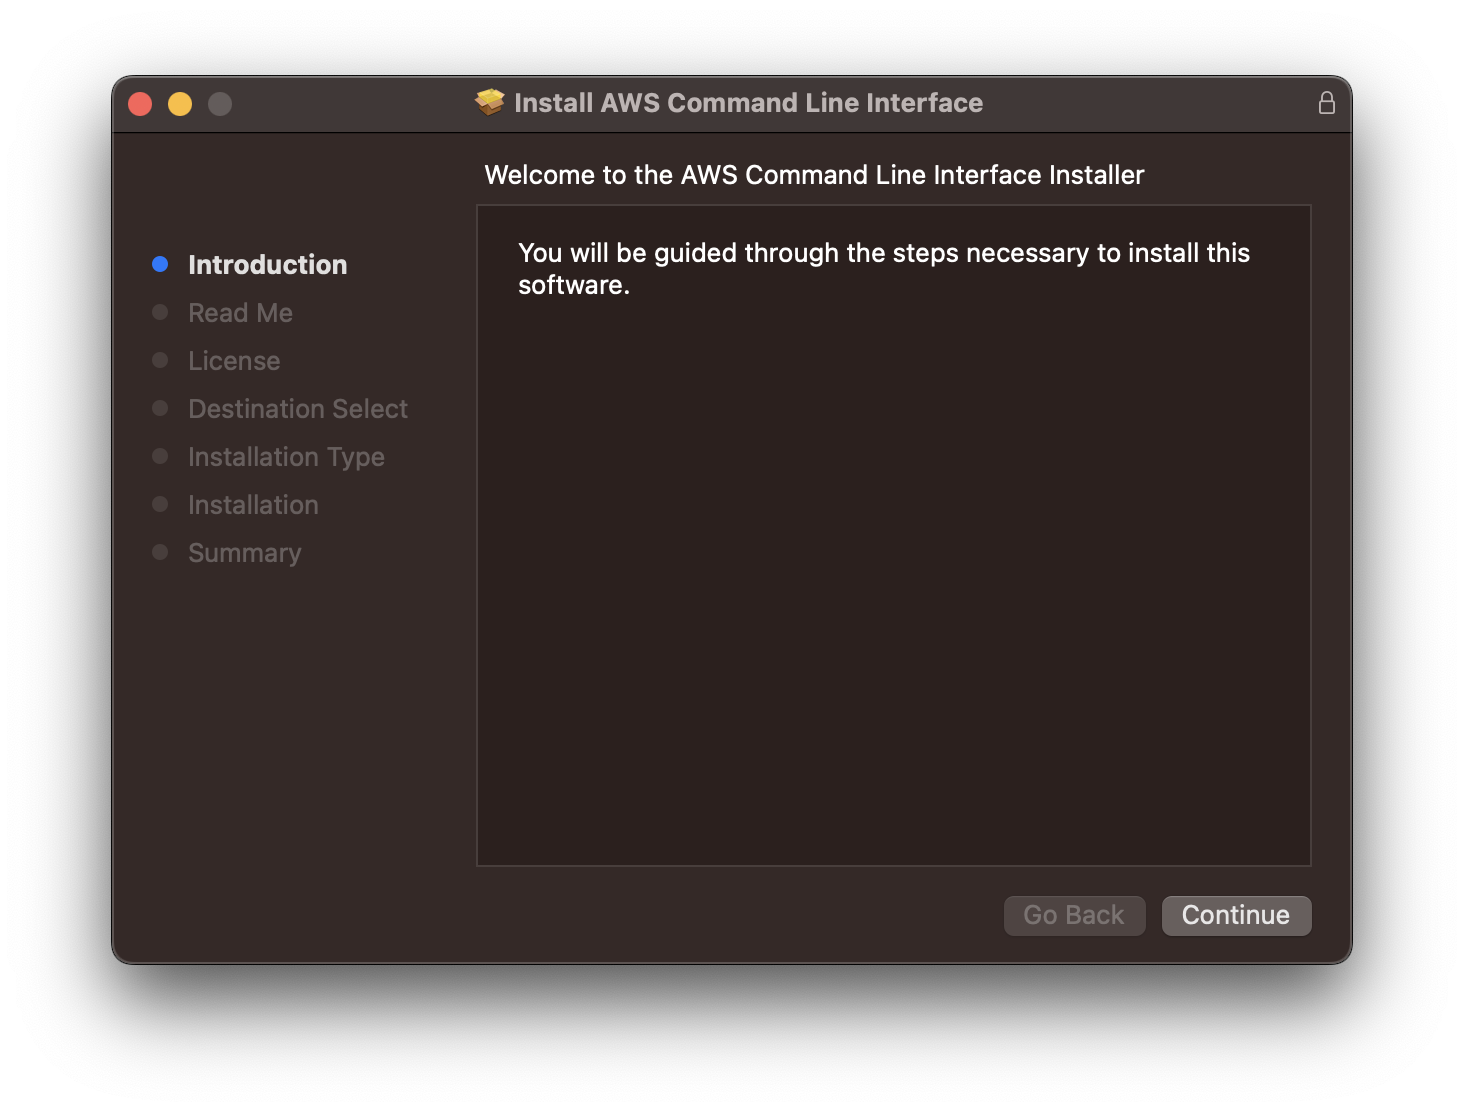 1 - Install AWS Command Line Interface Welcome to the AWS Command Line Interface Installer Screen